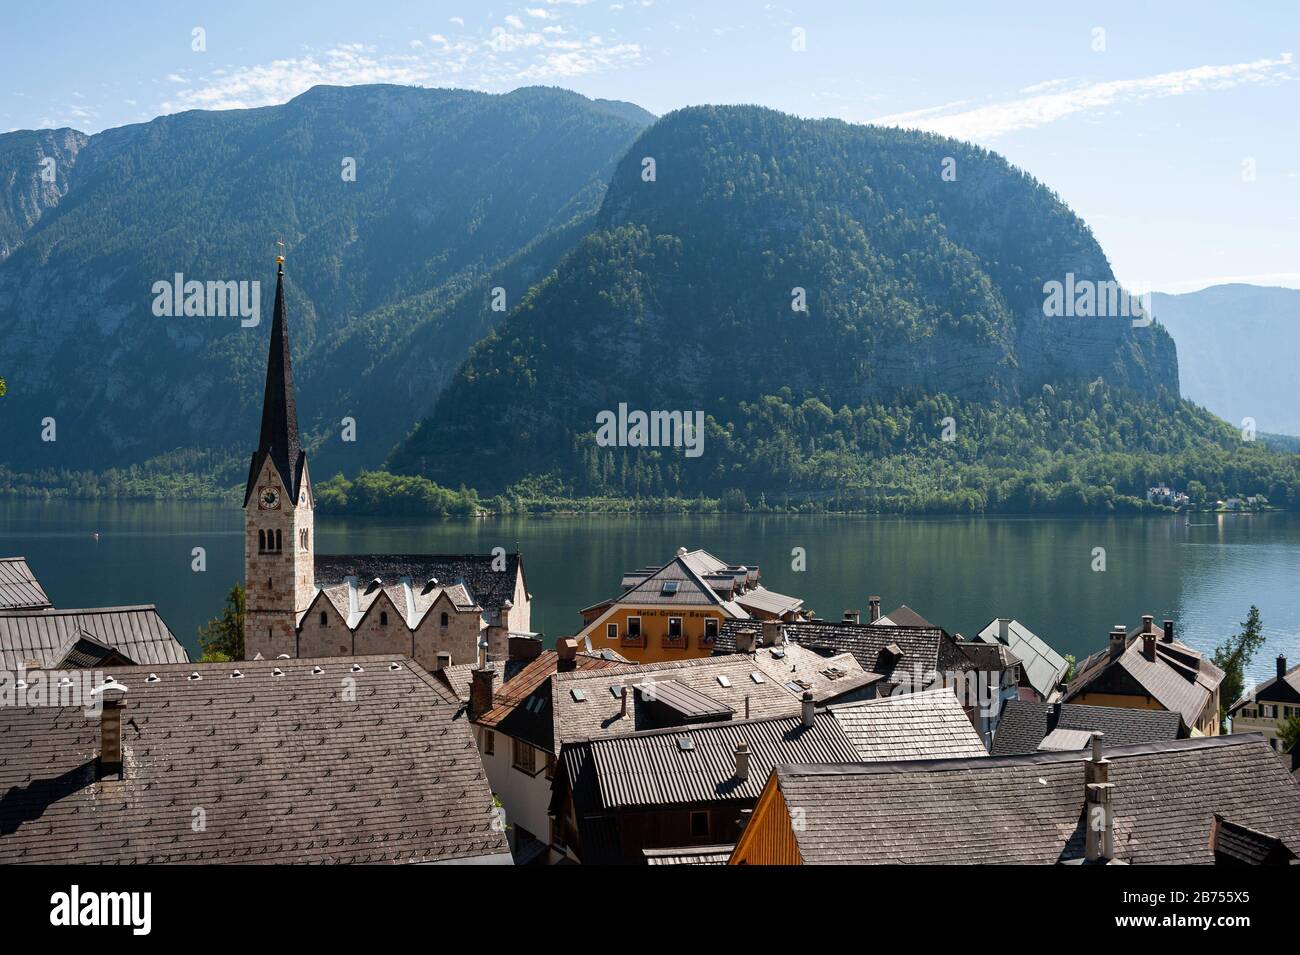 18.06.2019, Hallstatt, Salzkammergut, Upper Austria, Austria, Europe - View of Hallstatt with the Hallstaetter lake and mountains in the background. The small town is a favorite travel destination of Chinese and exists as a replica in the Guangdong province in China. [automated translation] Stock Photo